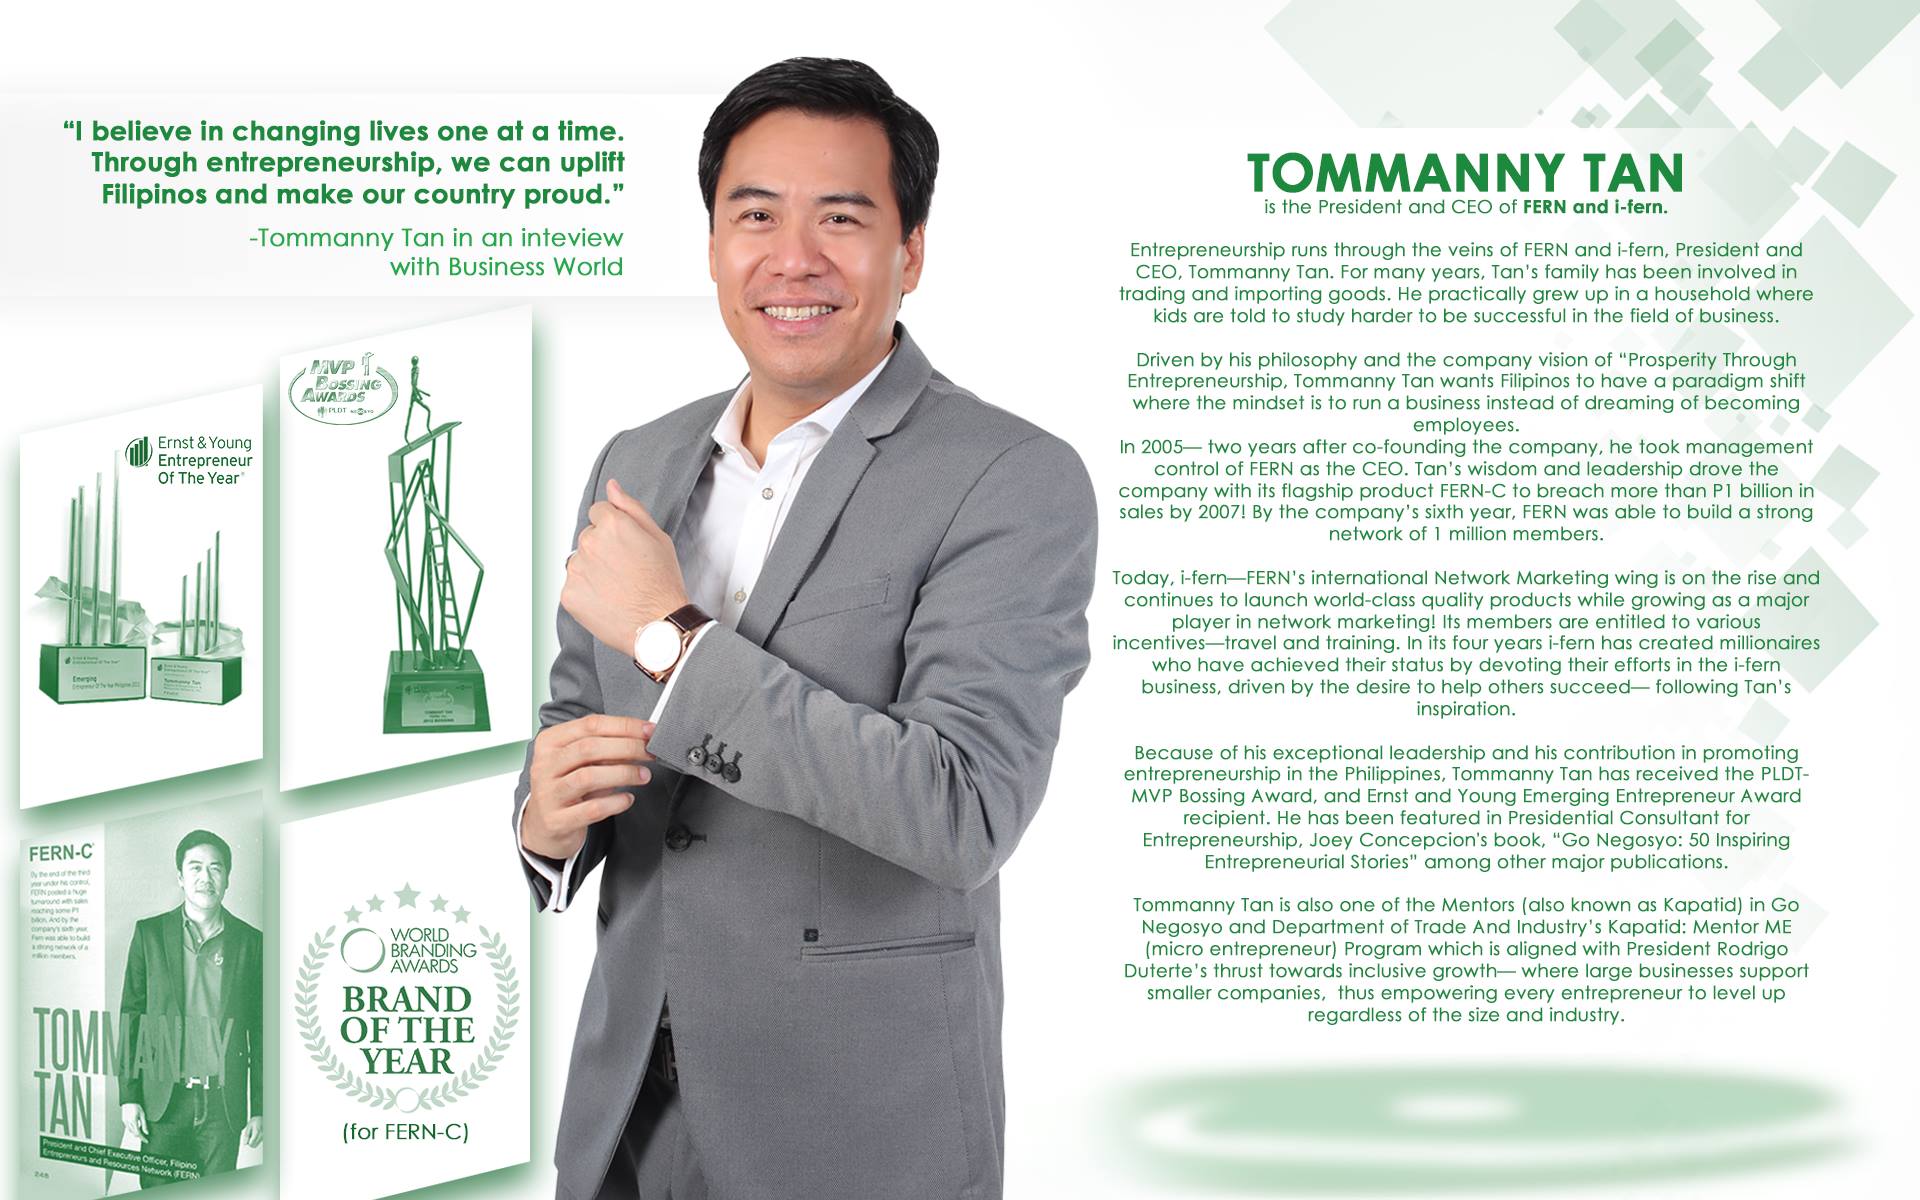 Tomanny Tan GoNegosyo Top 50. FERN Inc, i-FERN & FERN-C World Branding Awards. MVP Bossing Award. Ernst and Young Entrepreneur of the Year